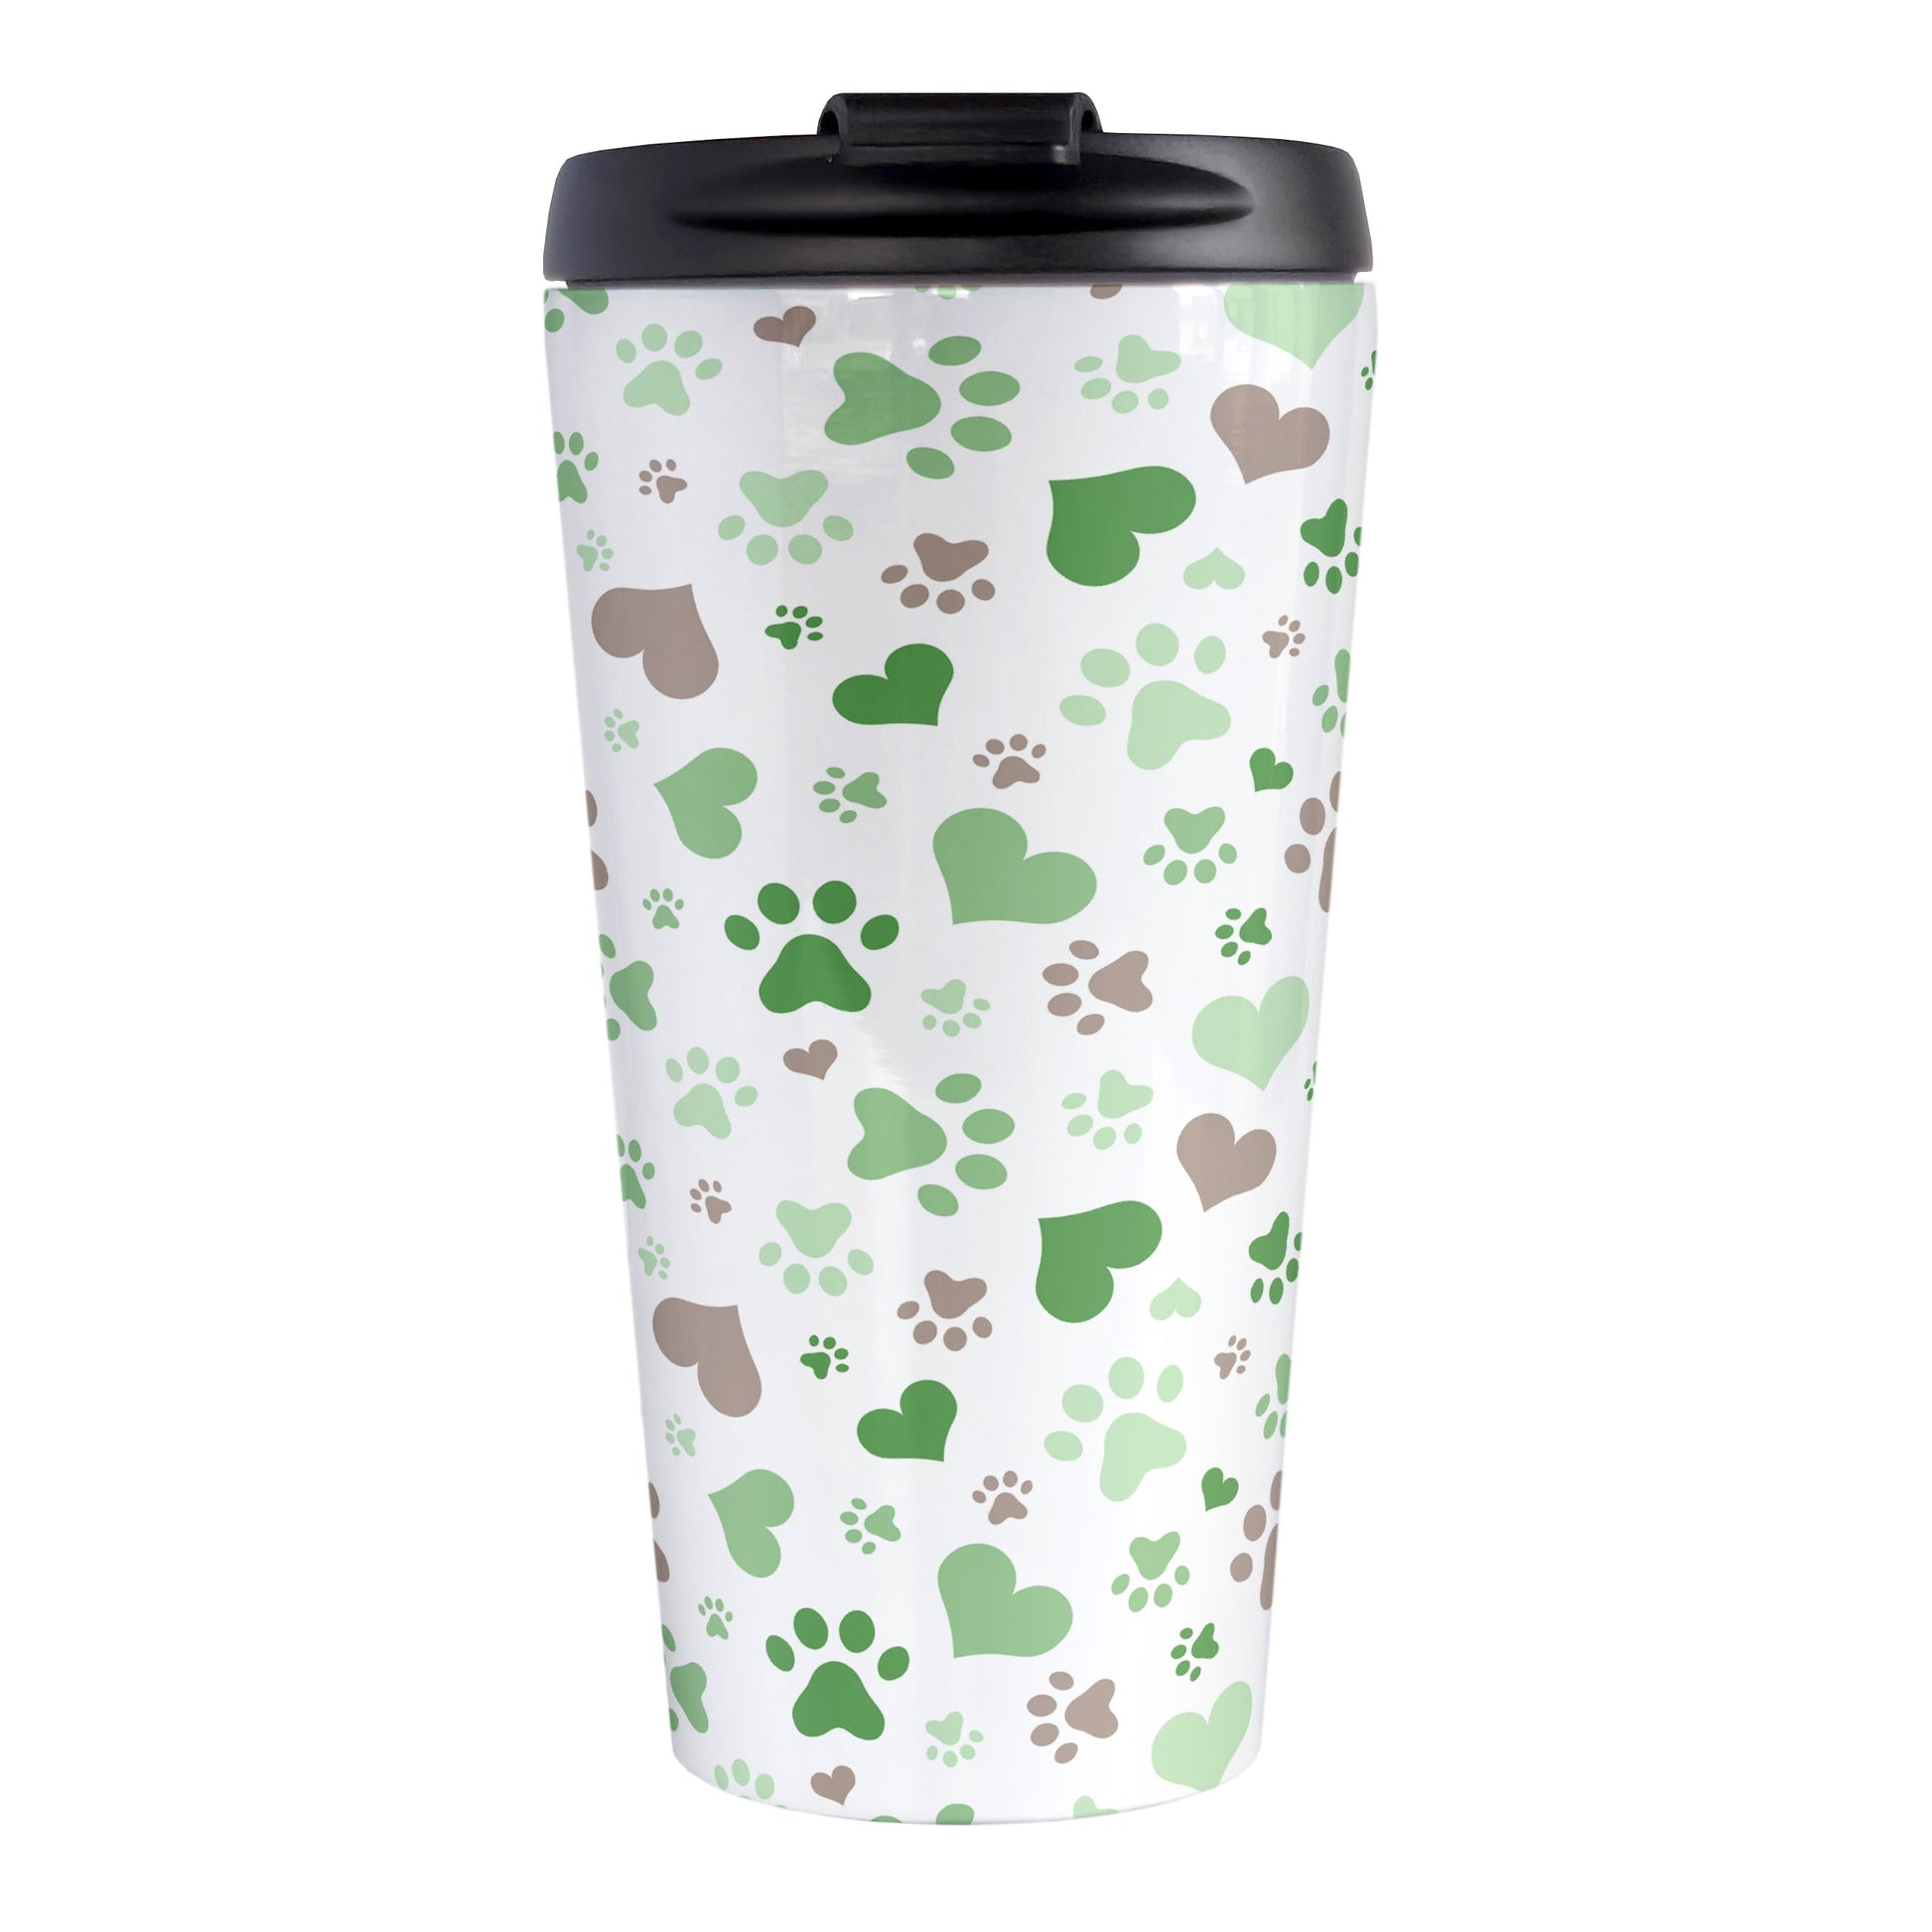 Green Hearts and Paw Prints Travel Mug (15oz) at Amy's Coffee Mugs. A stainless steel travel mug designed with a pattern of hearts and paw prints in brown and different shades of green that wraps around the mug. This travel mug is perfect for people love dogs and cute paw print designs.